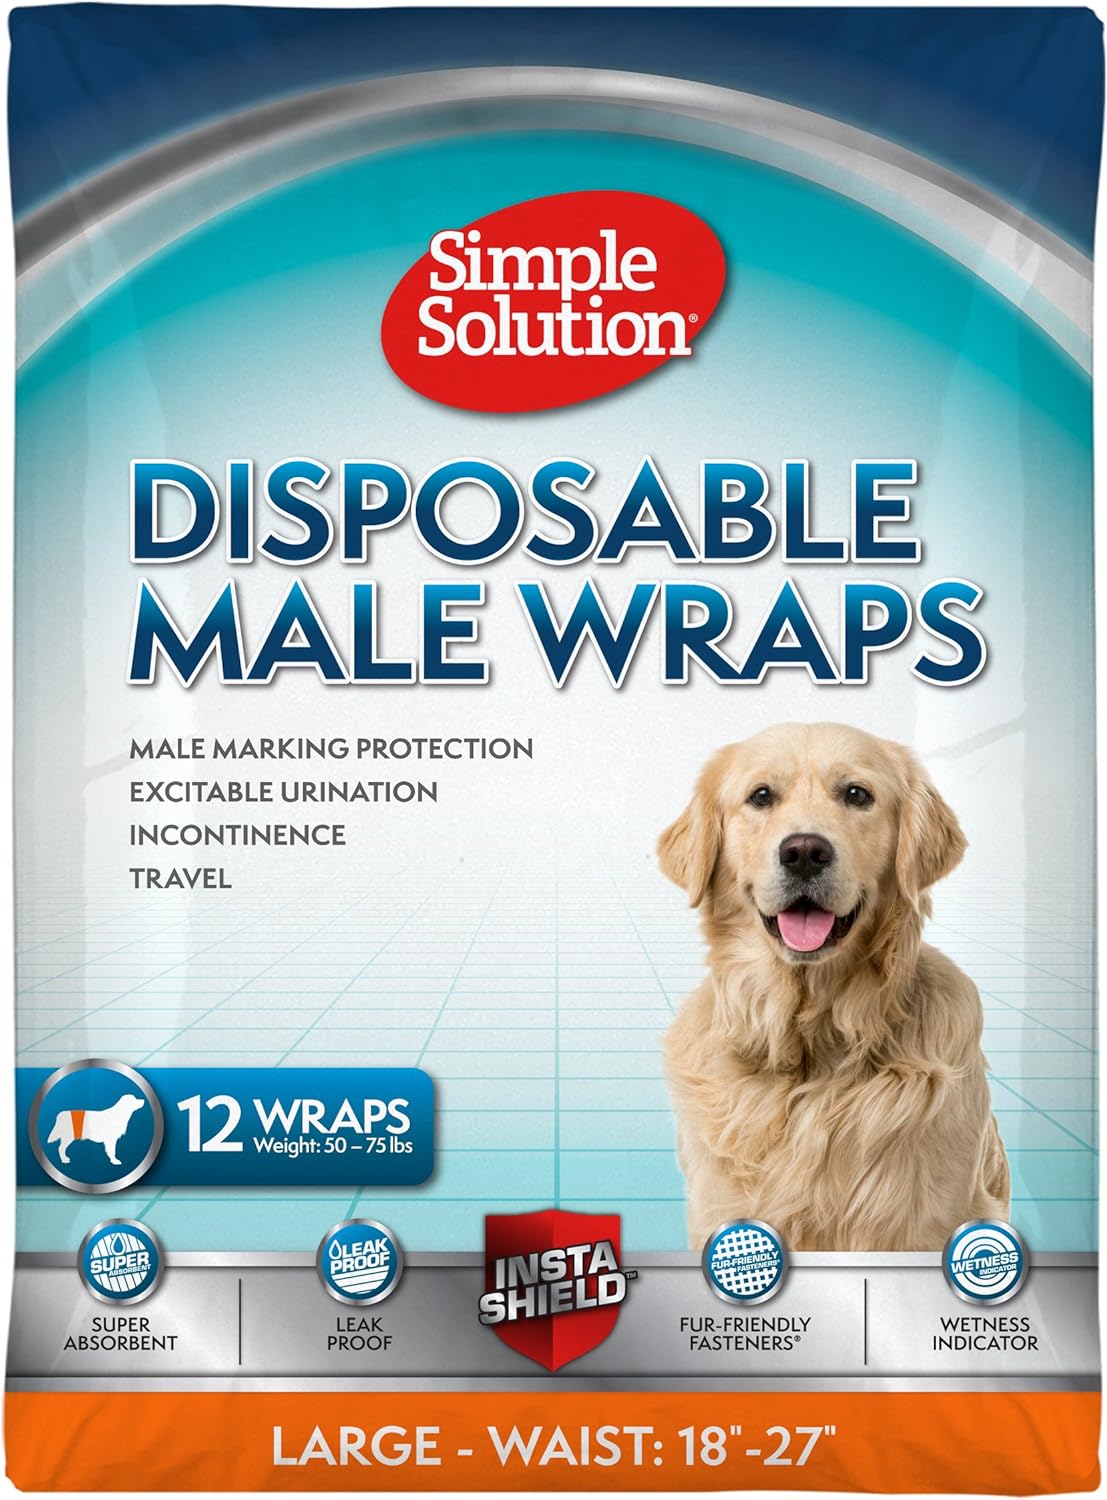 Simple Solution Disposable Male Wrap, 12-Pack, For Dogs